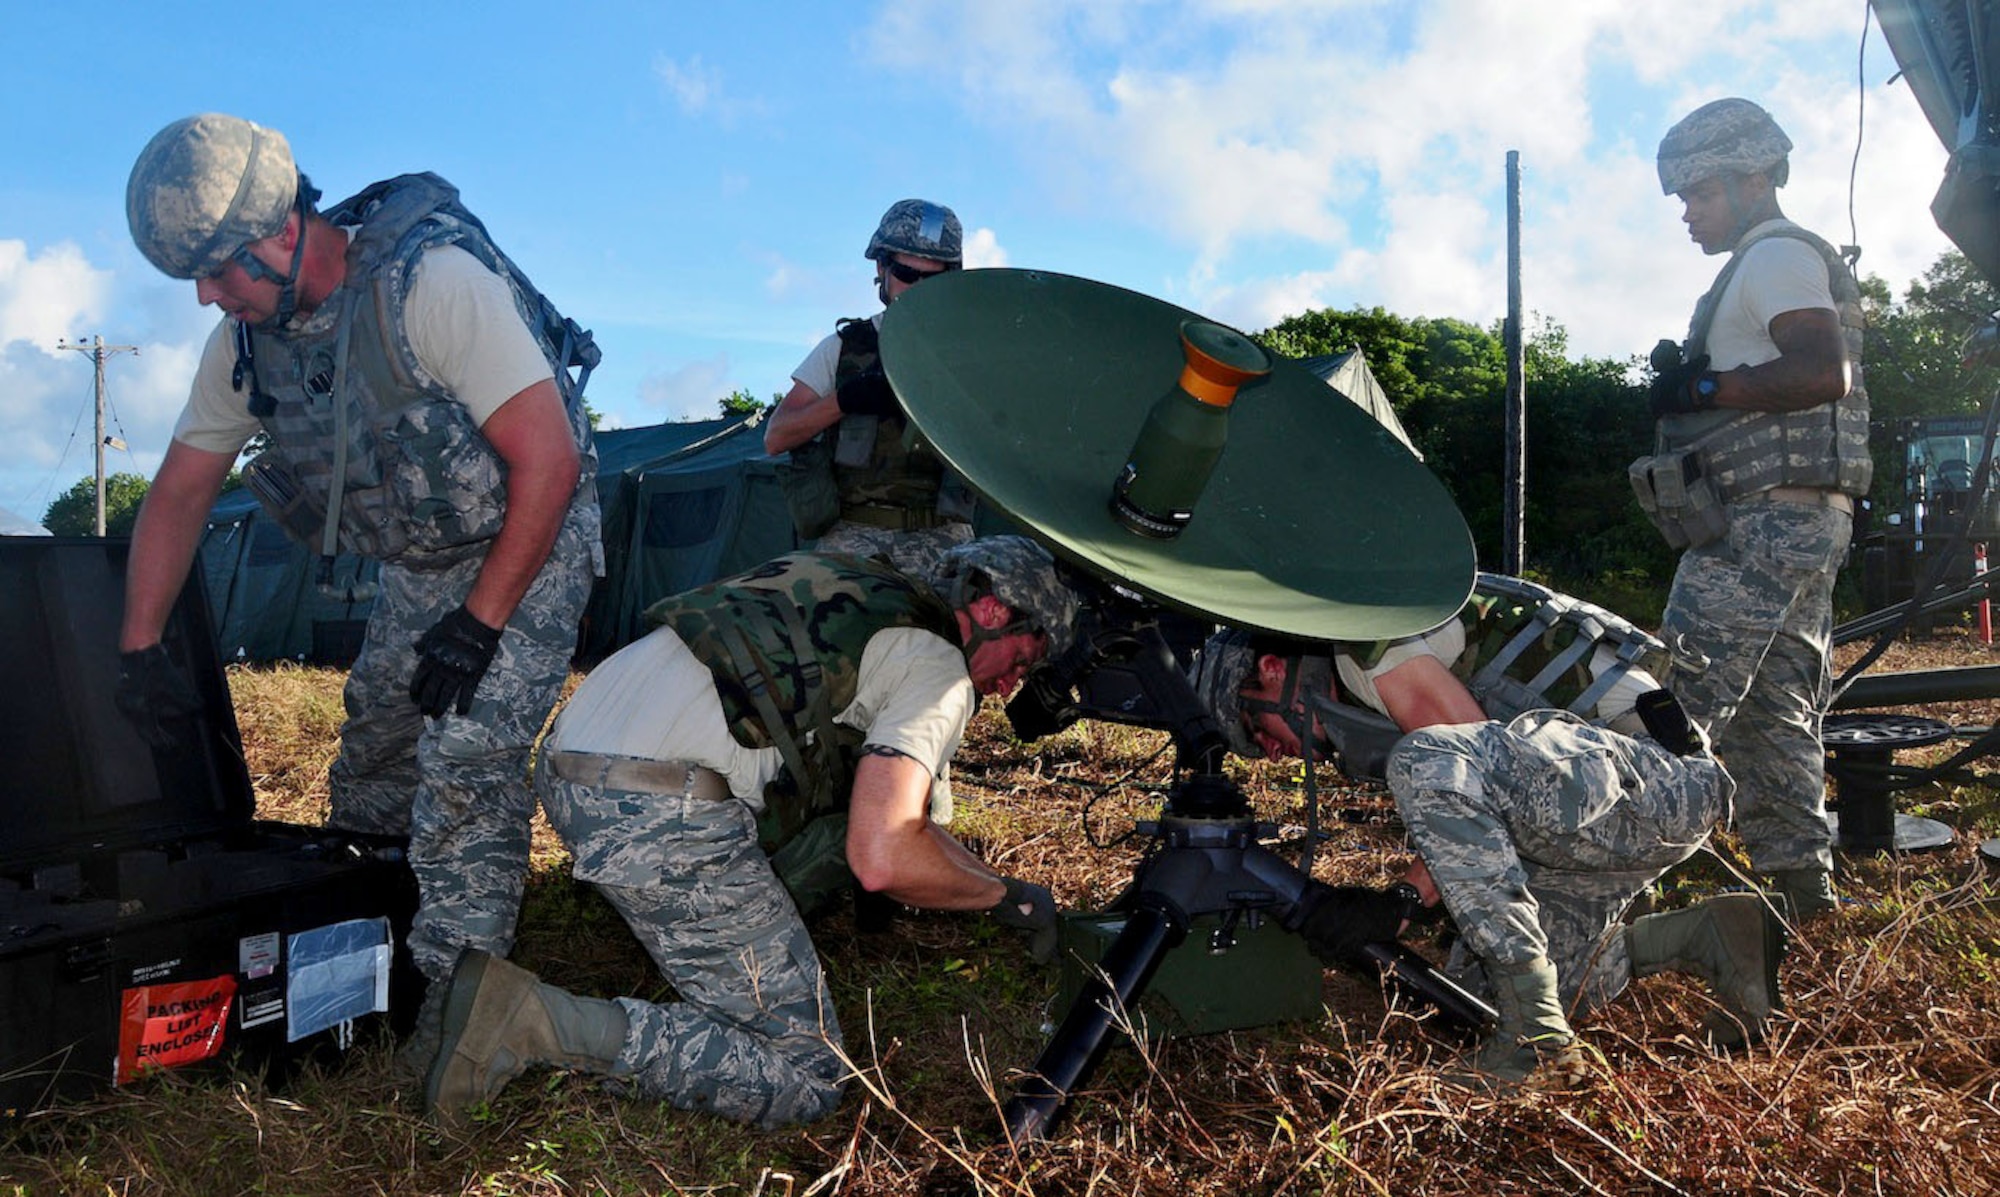 ANDERSEN AIR FORCE BASE, Guam--The 644th Combat Communications Squadron Airmen set up a satellite dish that allows the team to be current with the latest world events during Exercise Dragon Thunder April 21. Satellite transmission is the main source of communication and information in a deployed environment. (U.S. Air Force photo by Airman 1st Class Marianique Santos)